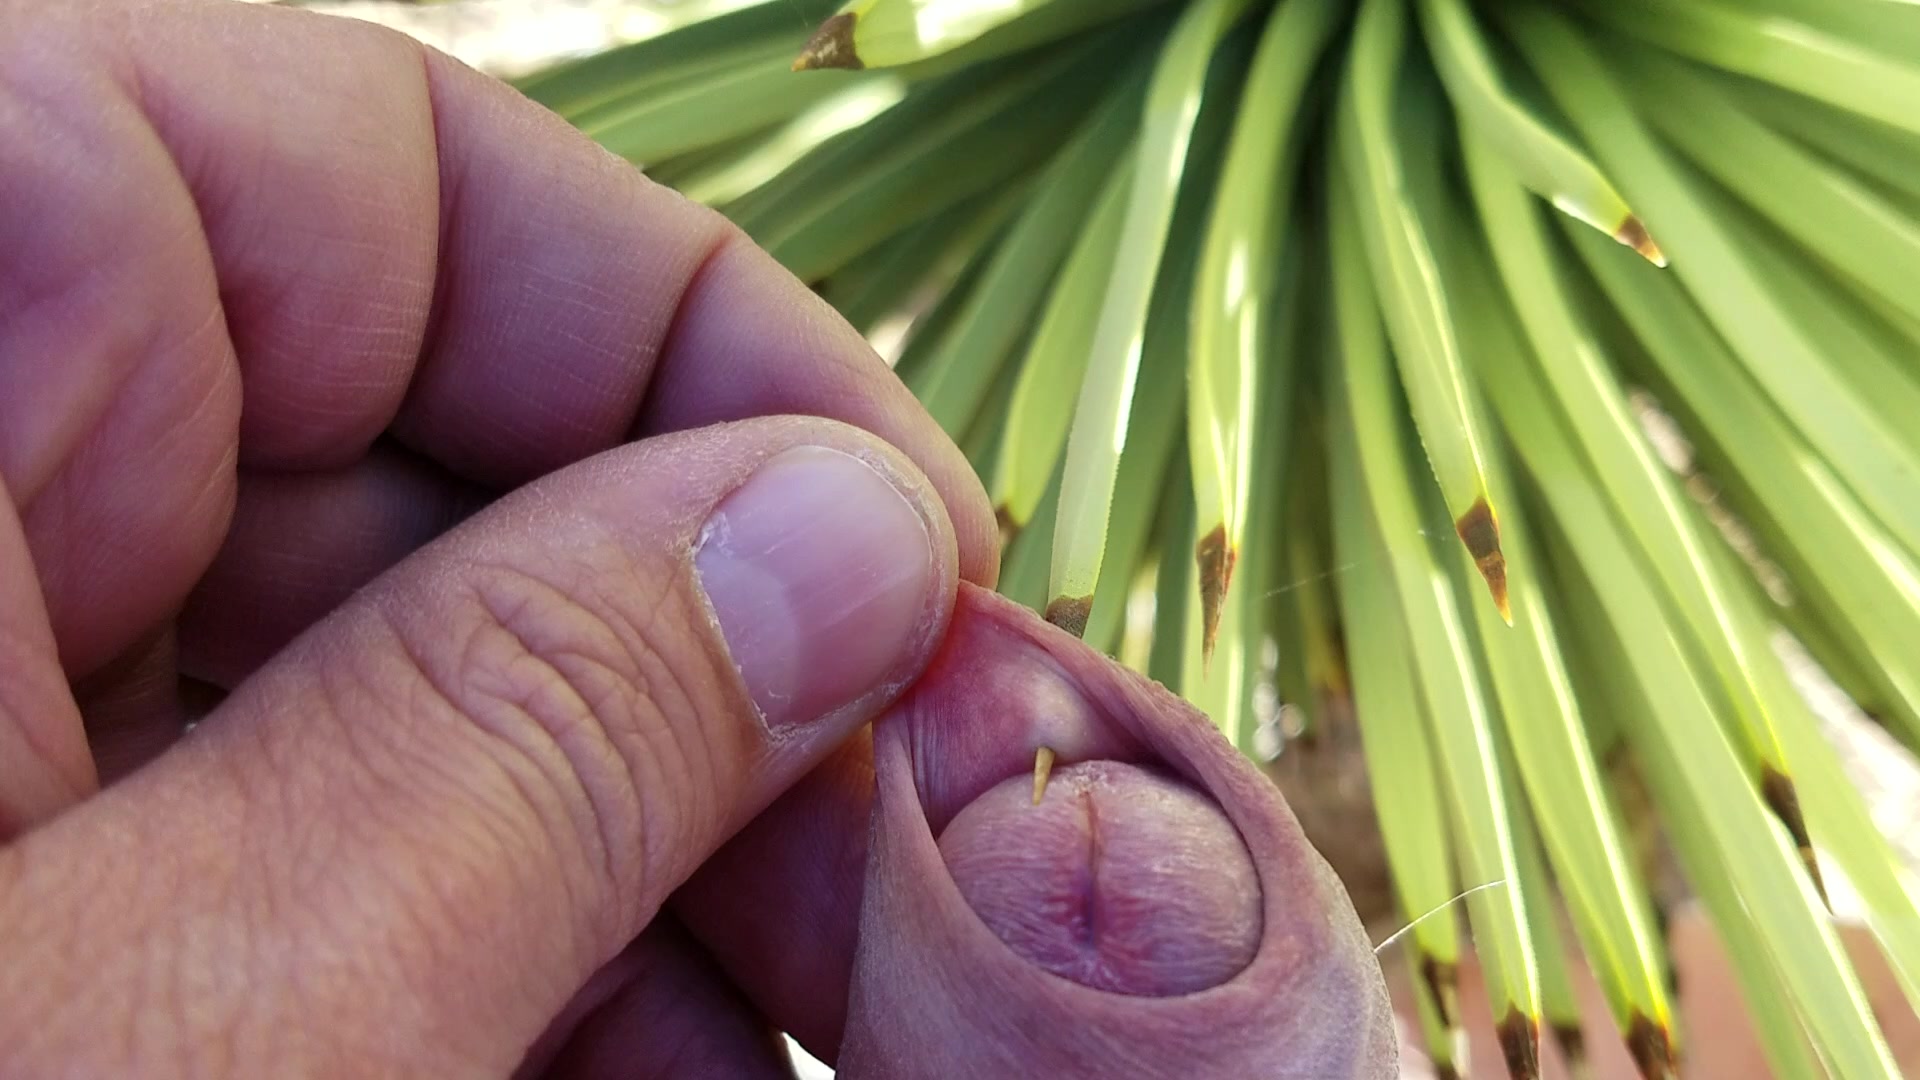 Self foreskin playpiercing with agave thorn in desert